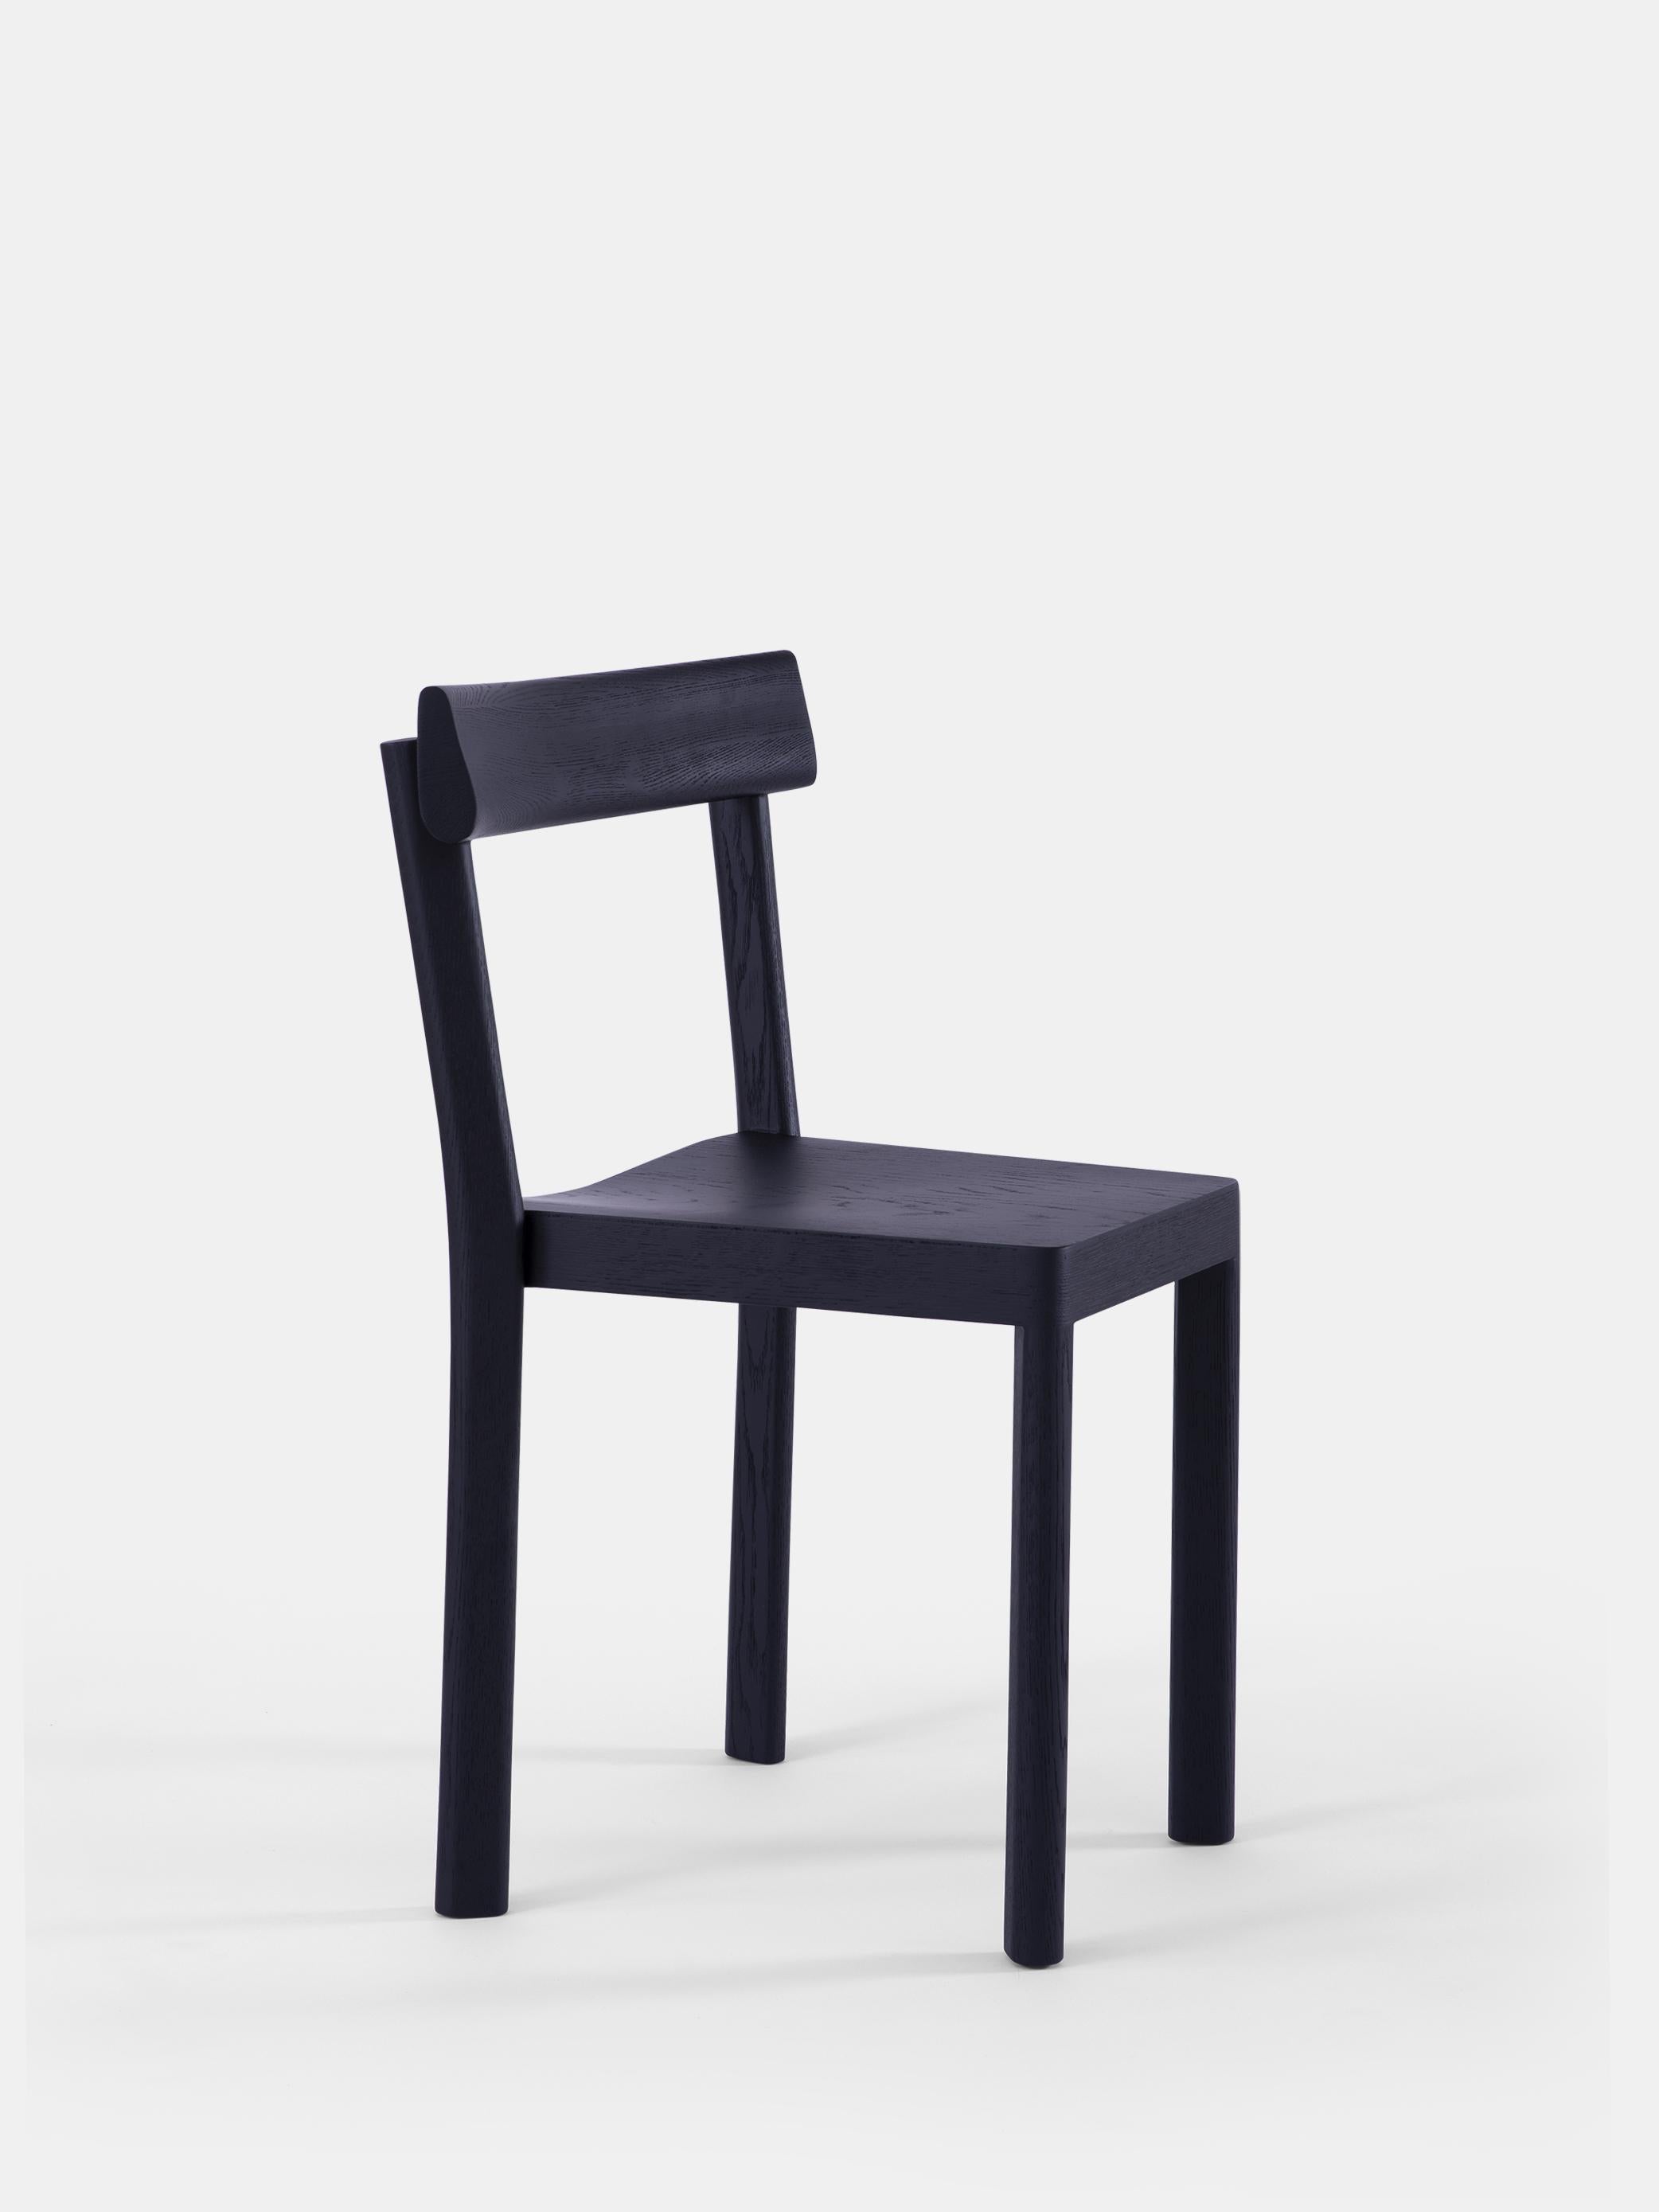 Set of 6 Galta Black Oak Chairs by Kann Design
Dimensions: D 43 x W 51 x H 80 cm.
Materials: Black lacquered oak.
Available in other finishes.

With the Galta, SCMP Design Office rethinks the classic bistro chair. The result is the epitome of